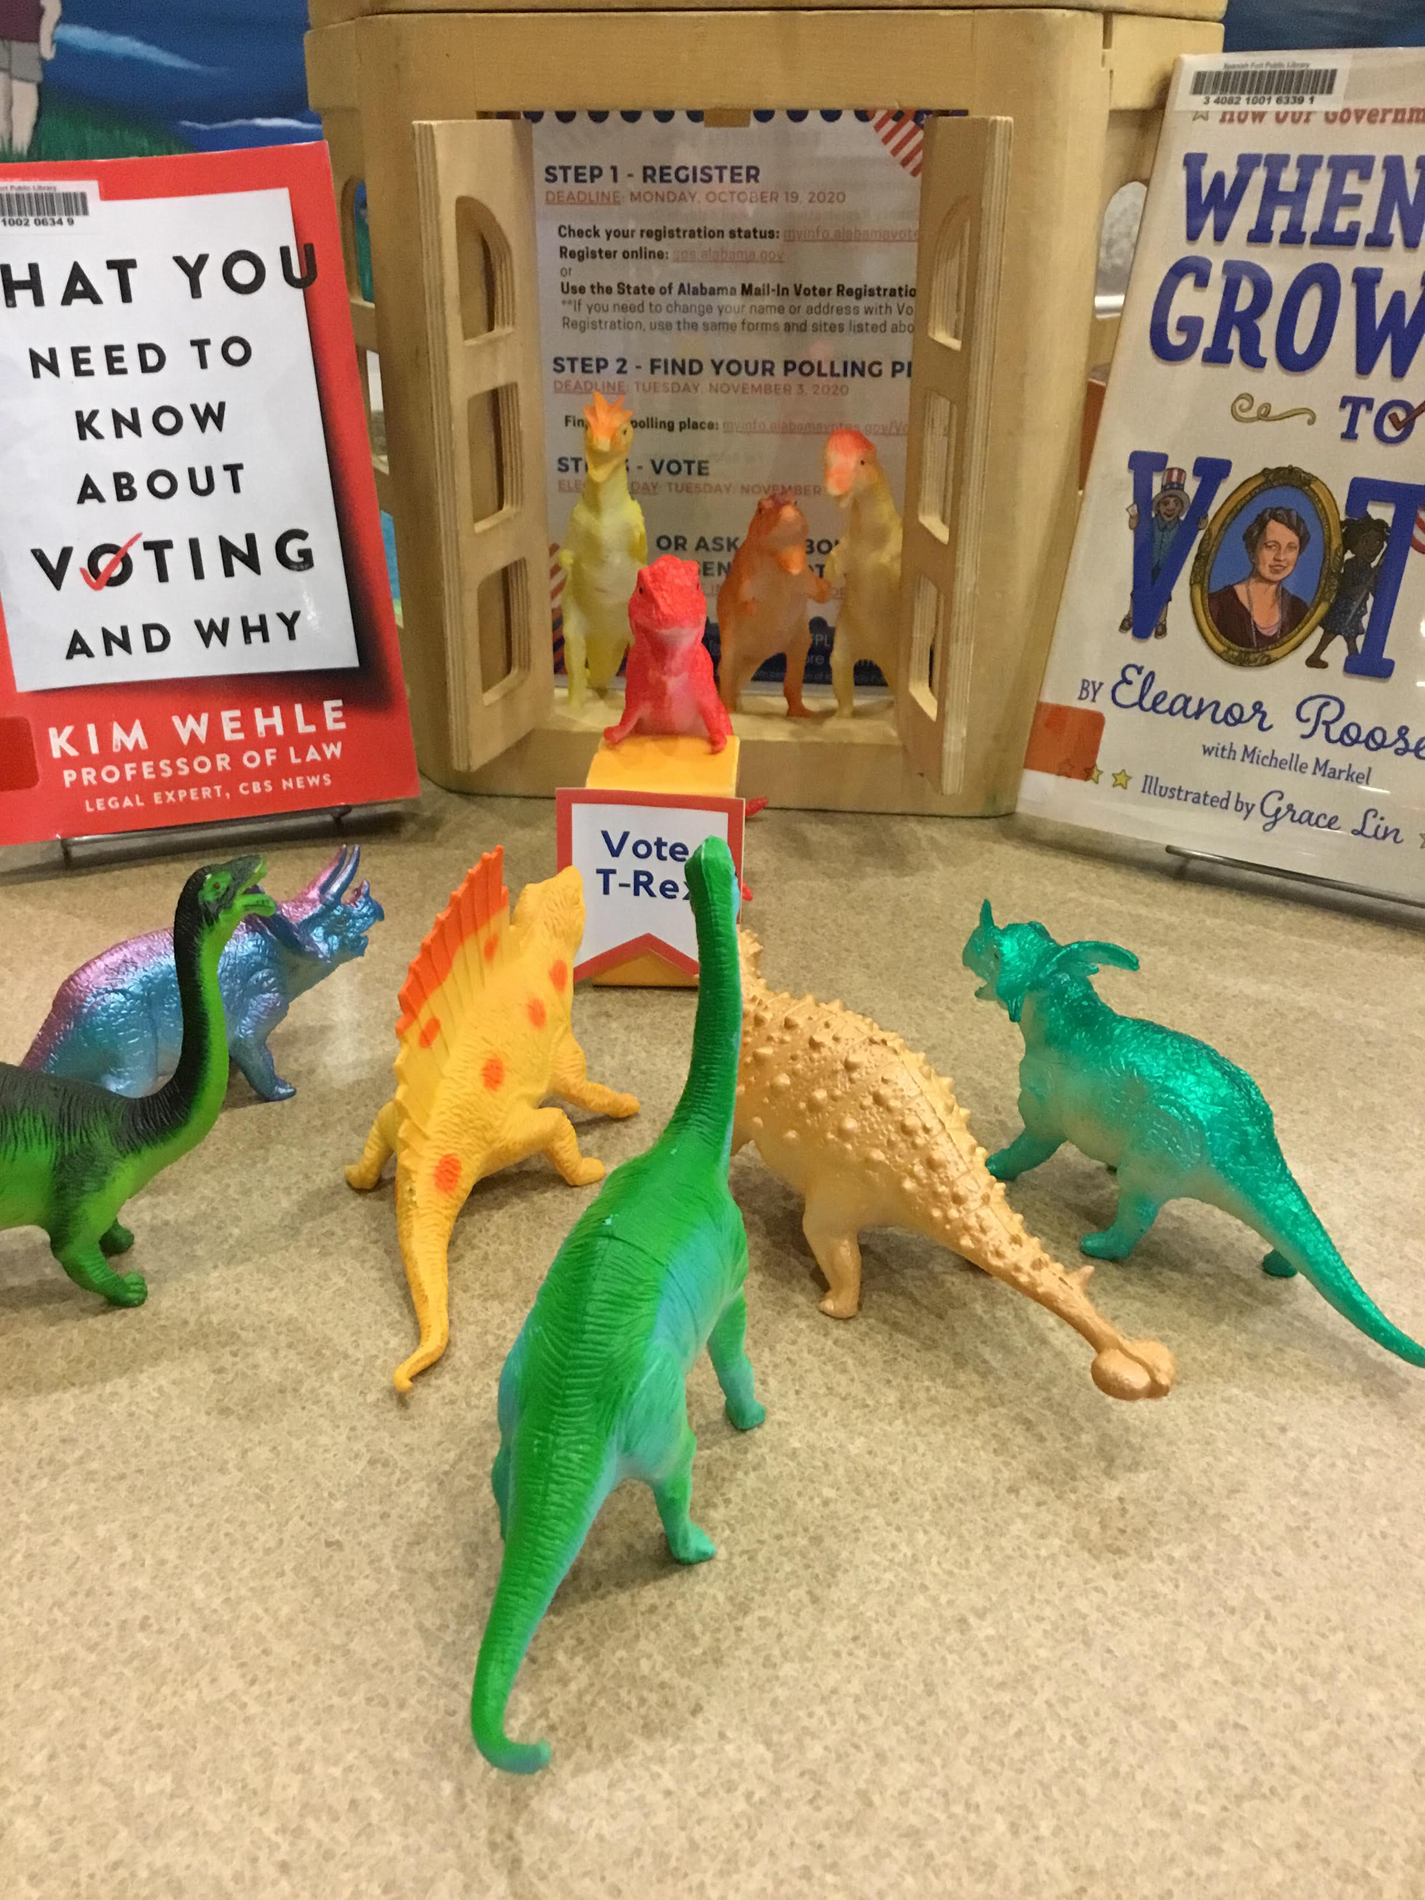 Dinosaur toy figures gathered around a toy figure t-rex standing at a toy podium with a banner reading "VOTE T-Rex" surrounded by books about voting